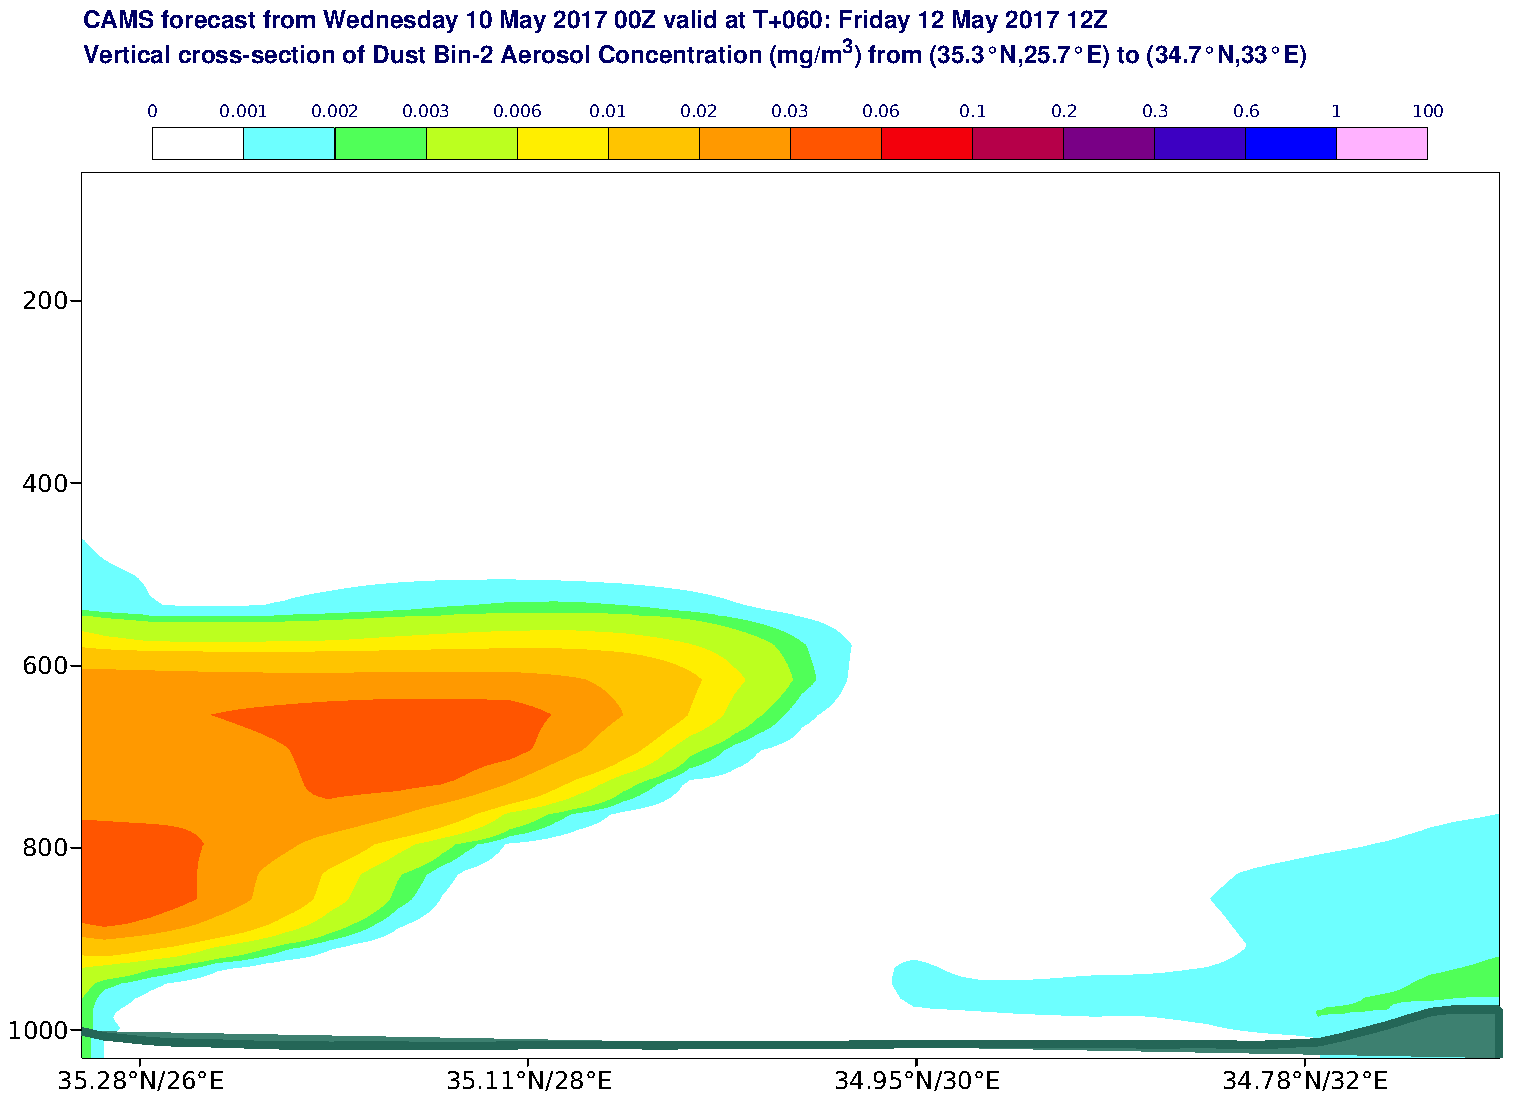 Vertical cross-section of Dust Bin-2 Aerosol Concentration (mg/m3) valid at T60 - 2017-05-12 12:00